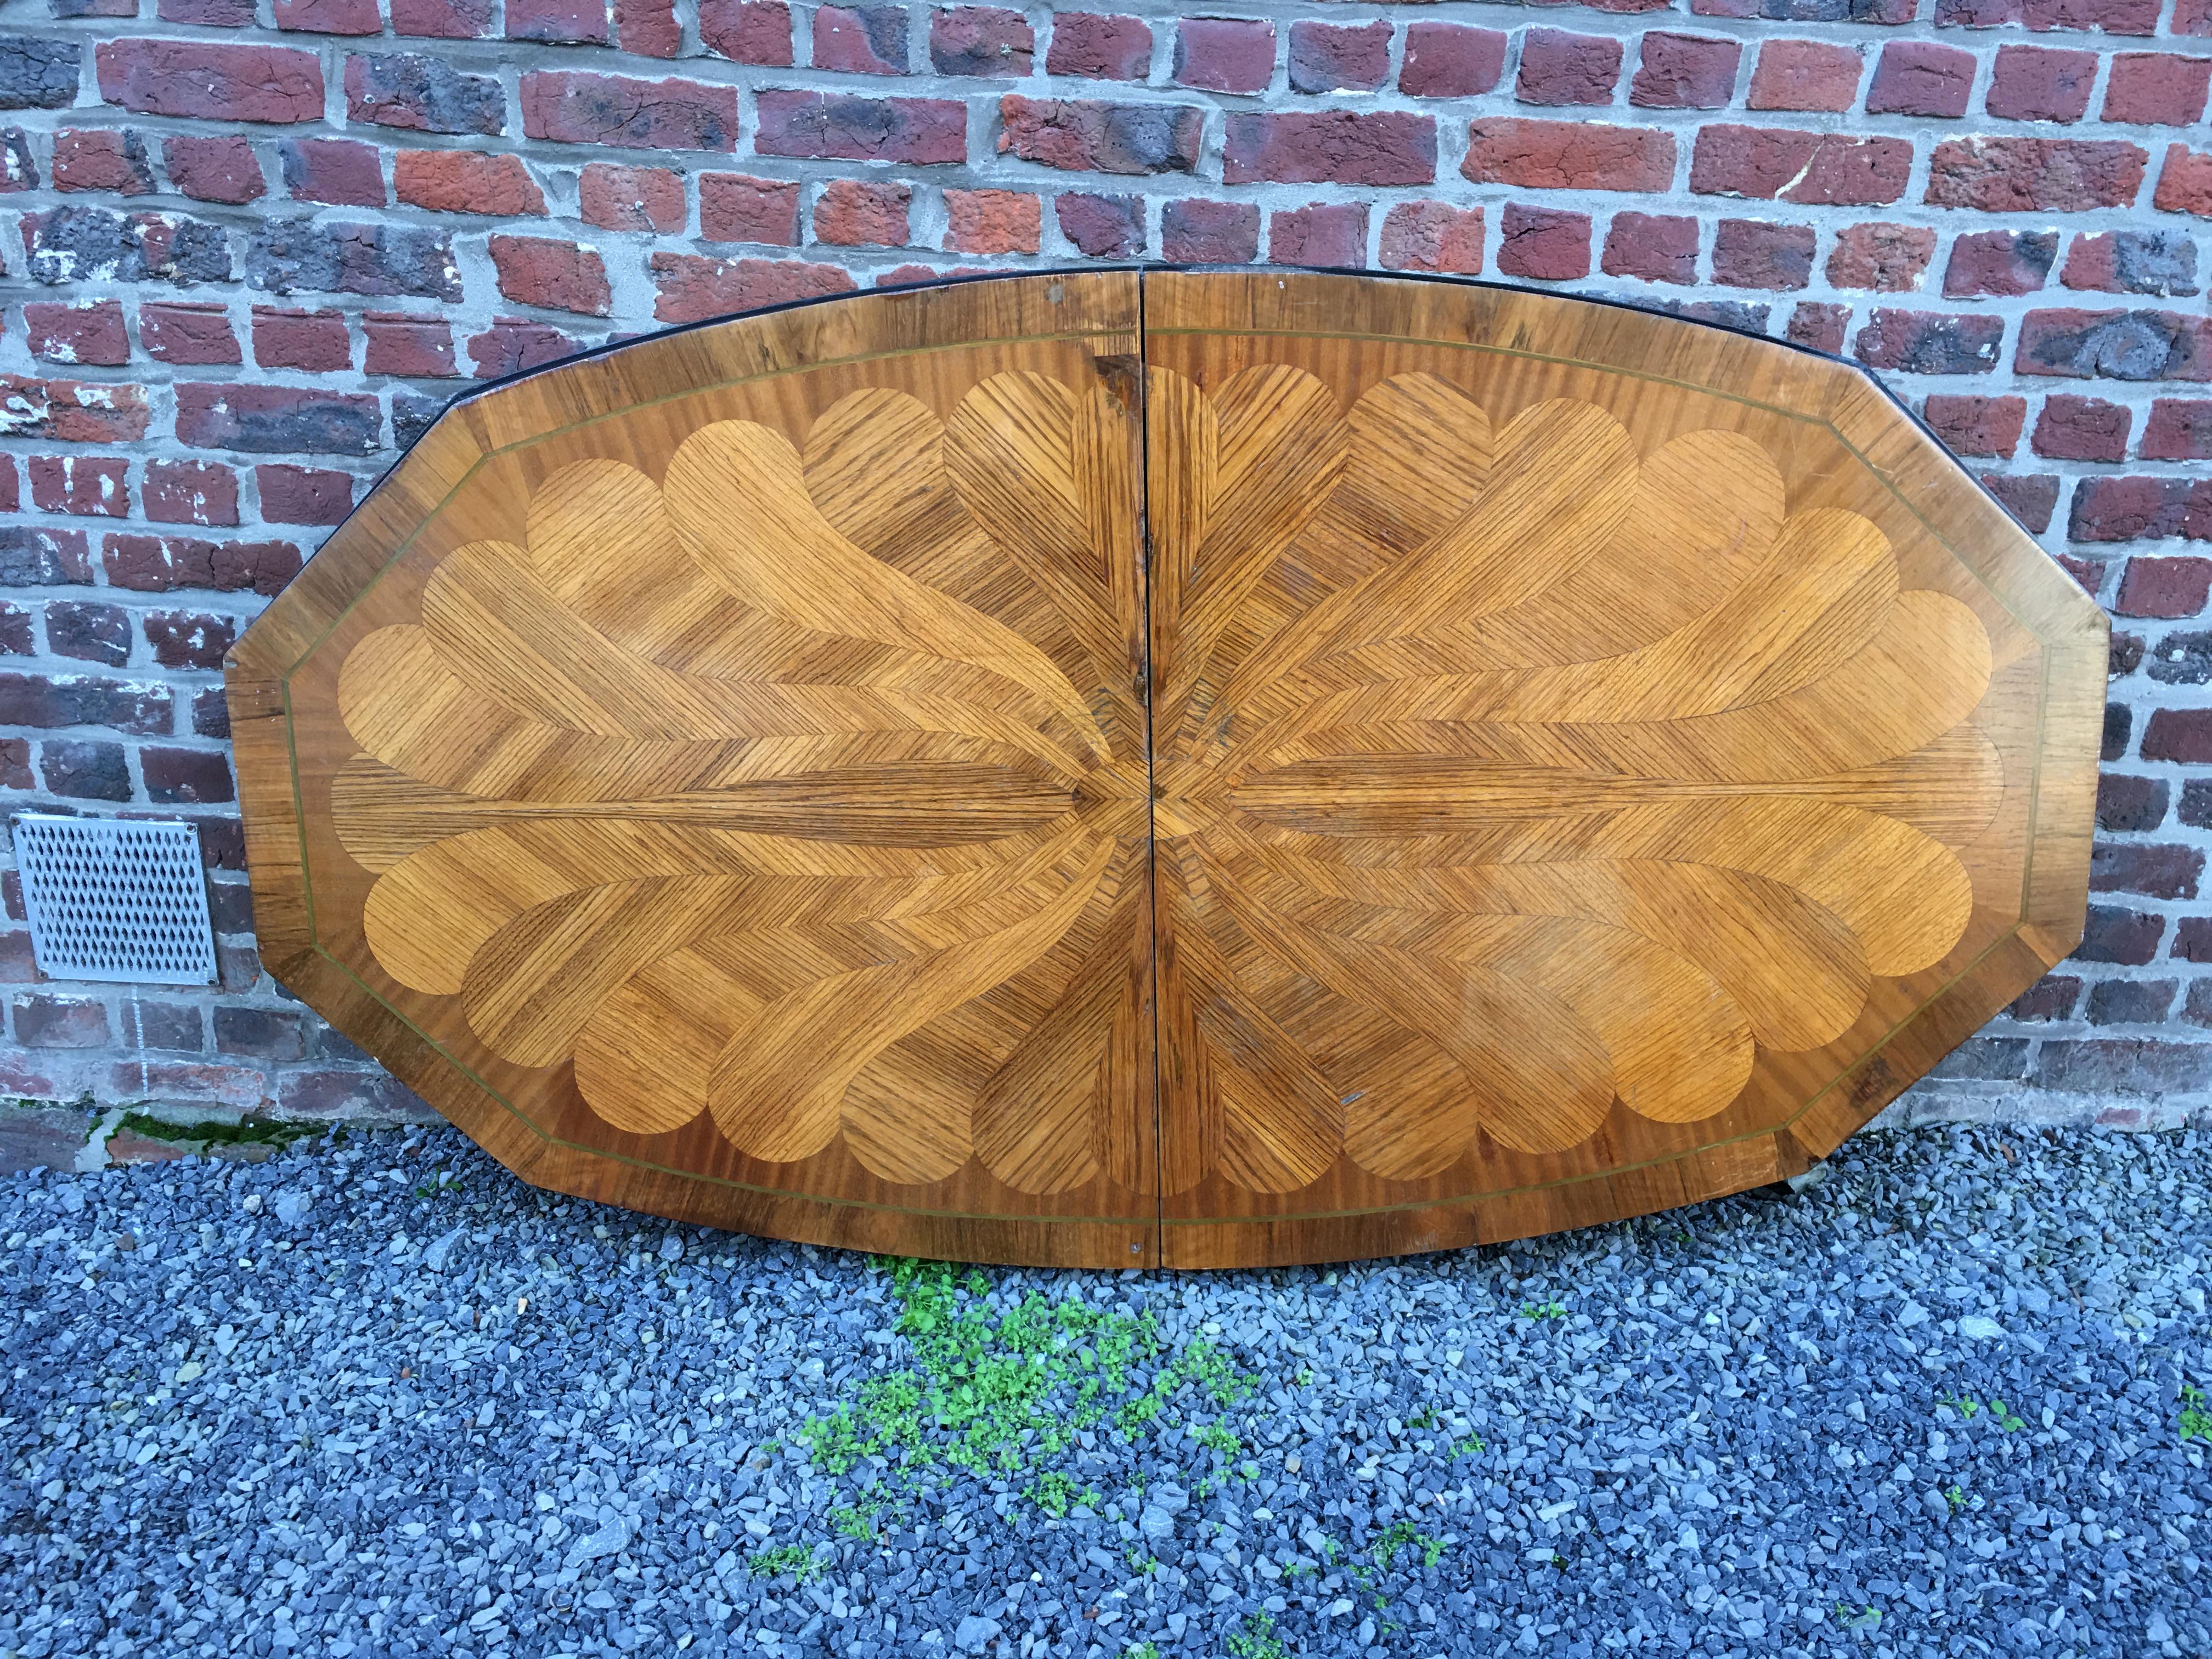 Early 20th Century Large Art Deco Dining Table with Marquetry Design on the Top, circa 1925-1930 For Sale